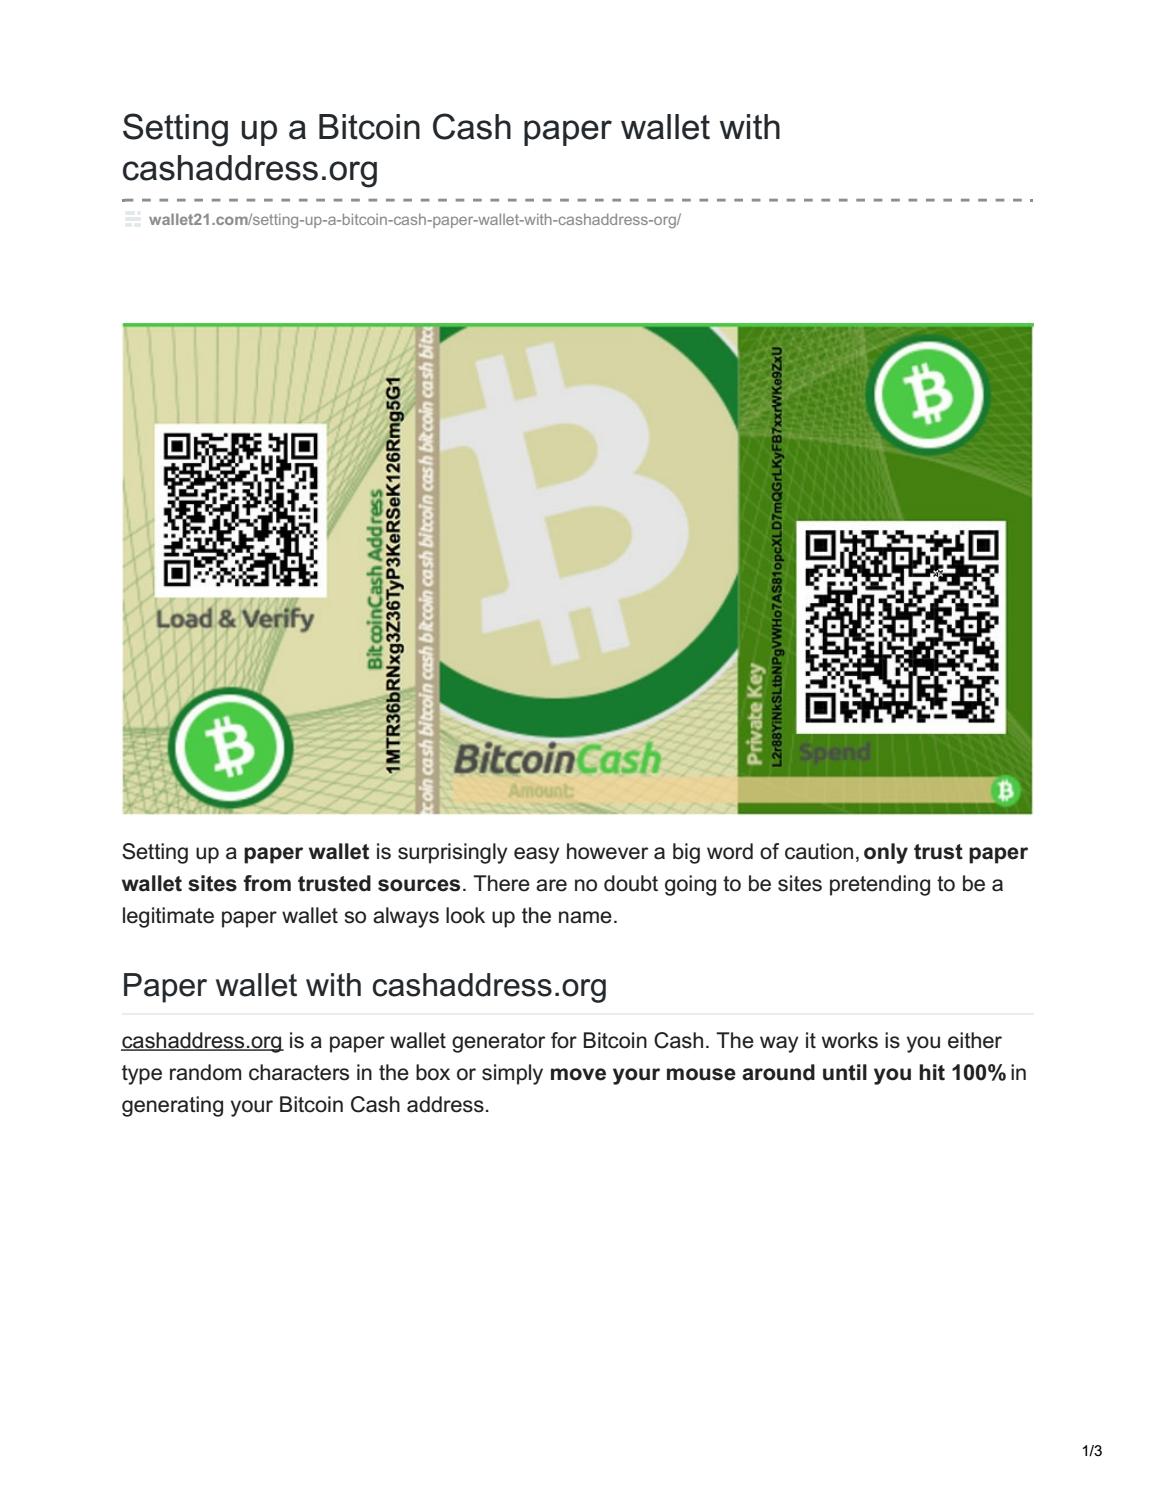 How to Transfer Bitcoin From a Paper Wallet: A Few Technical Tips for Beginners